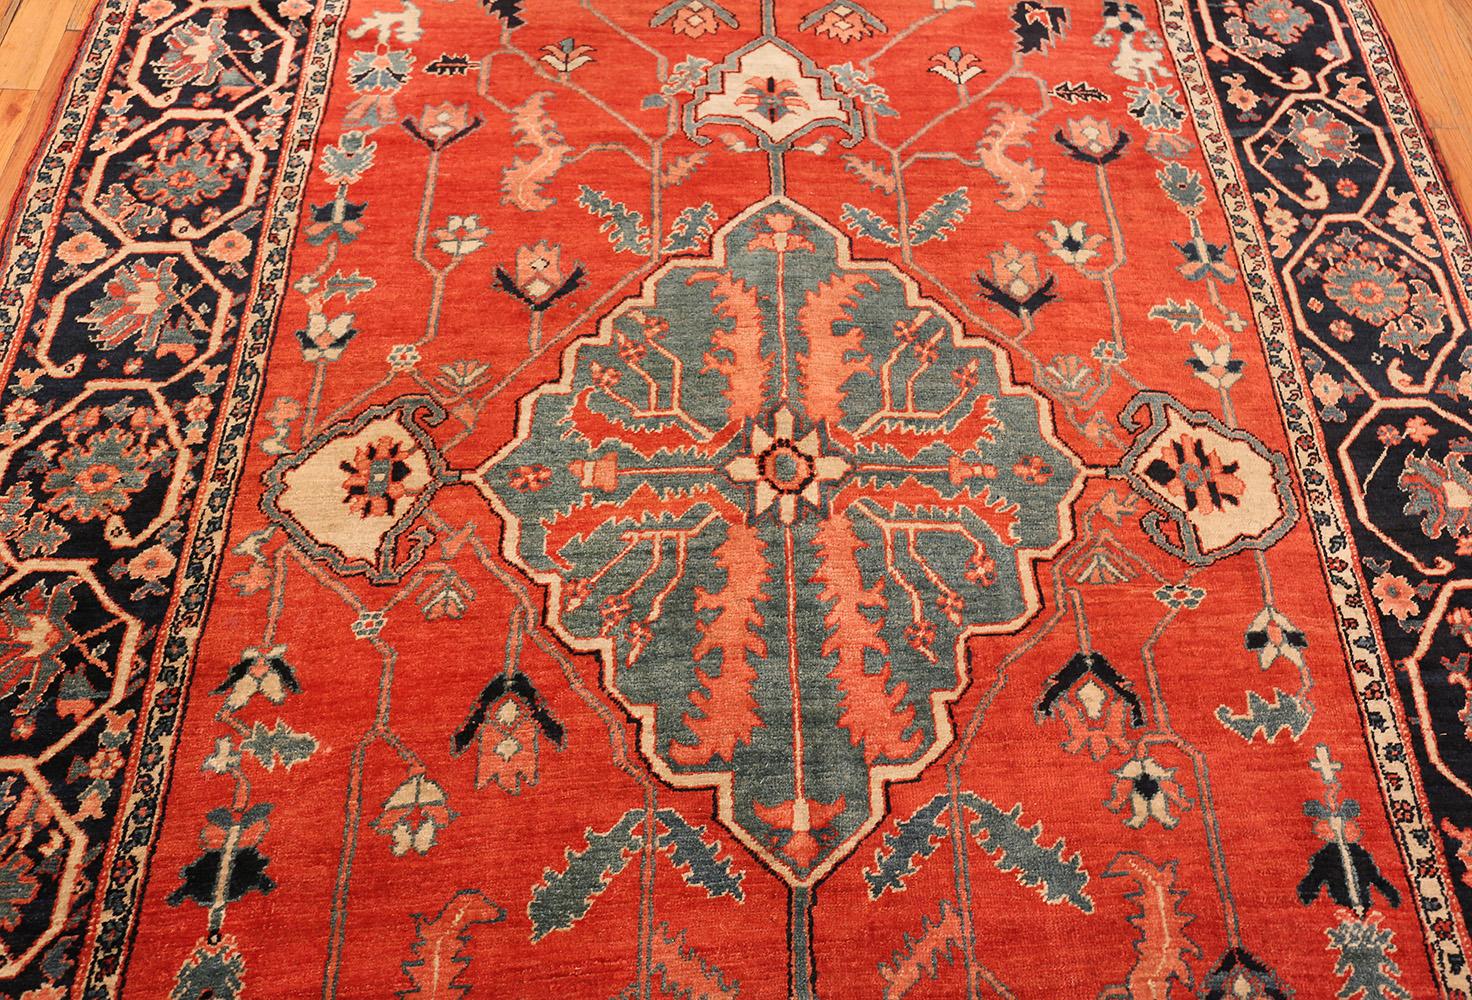 Early 20th Century Rare Long and Narrow Antique Persian Heriz Rug. Size: 7 ft x 18 ft